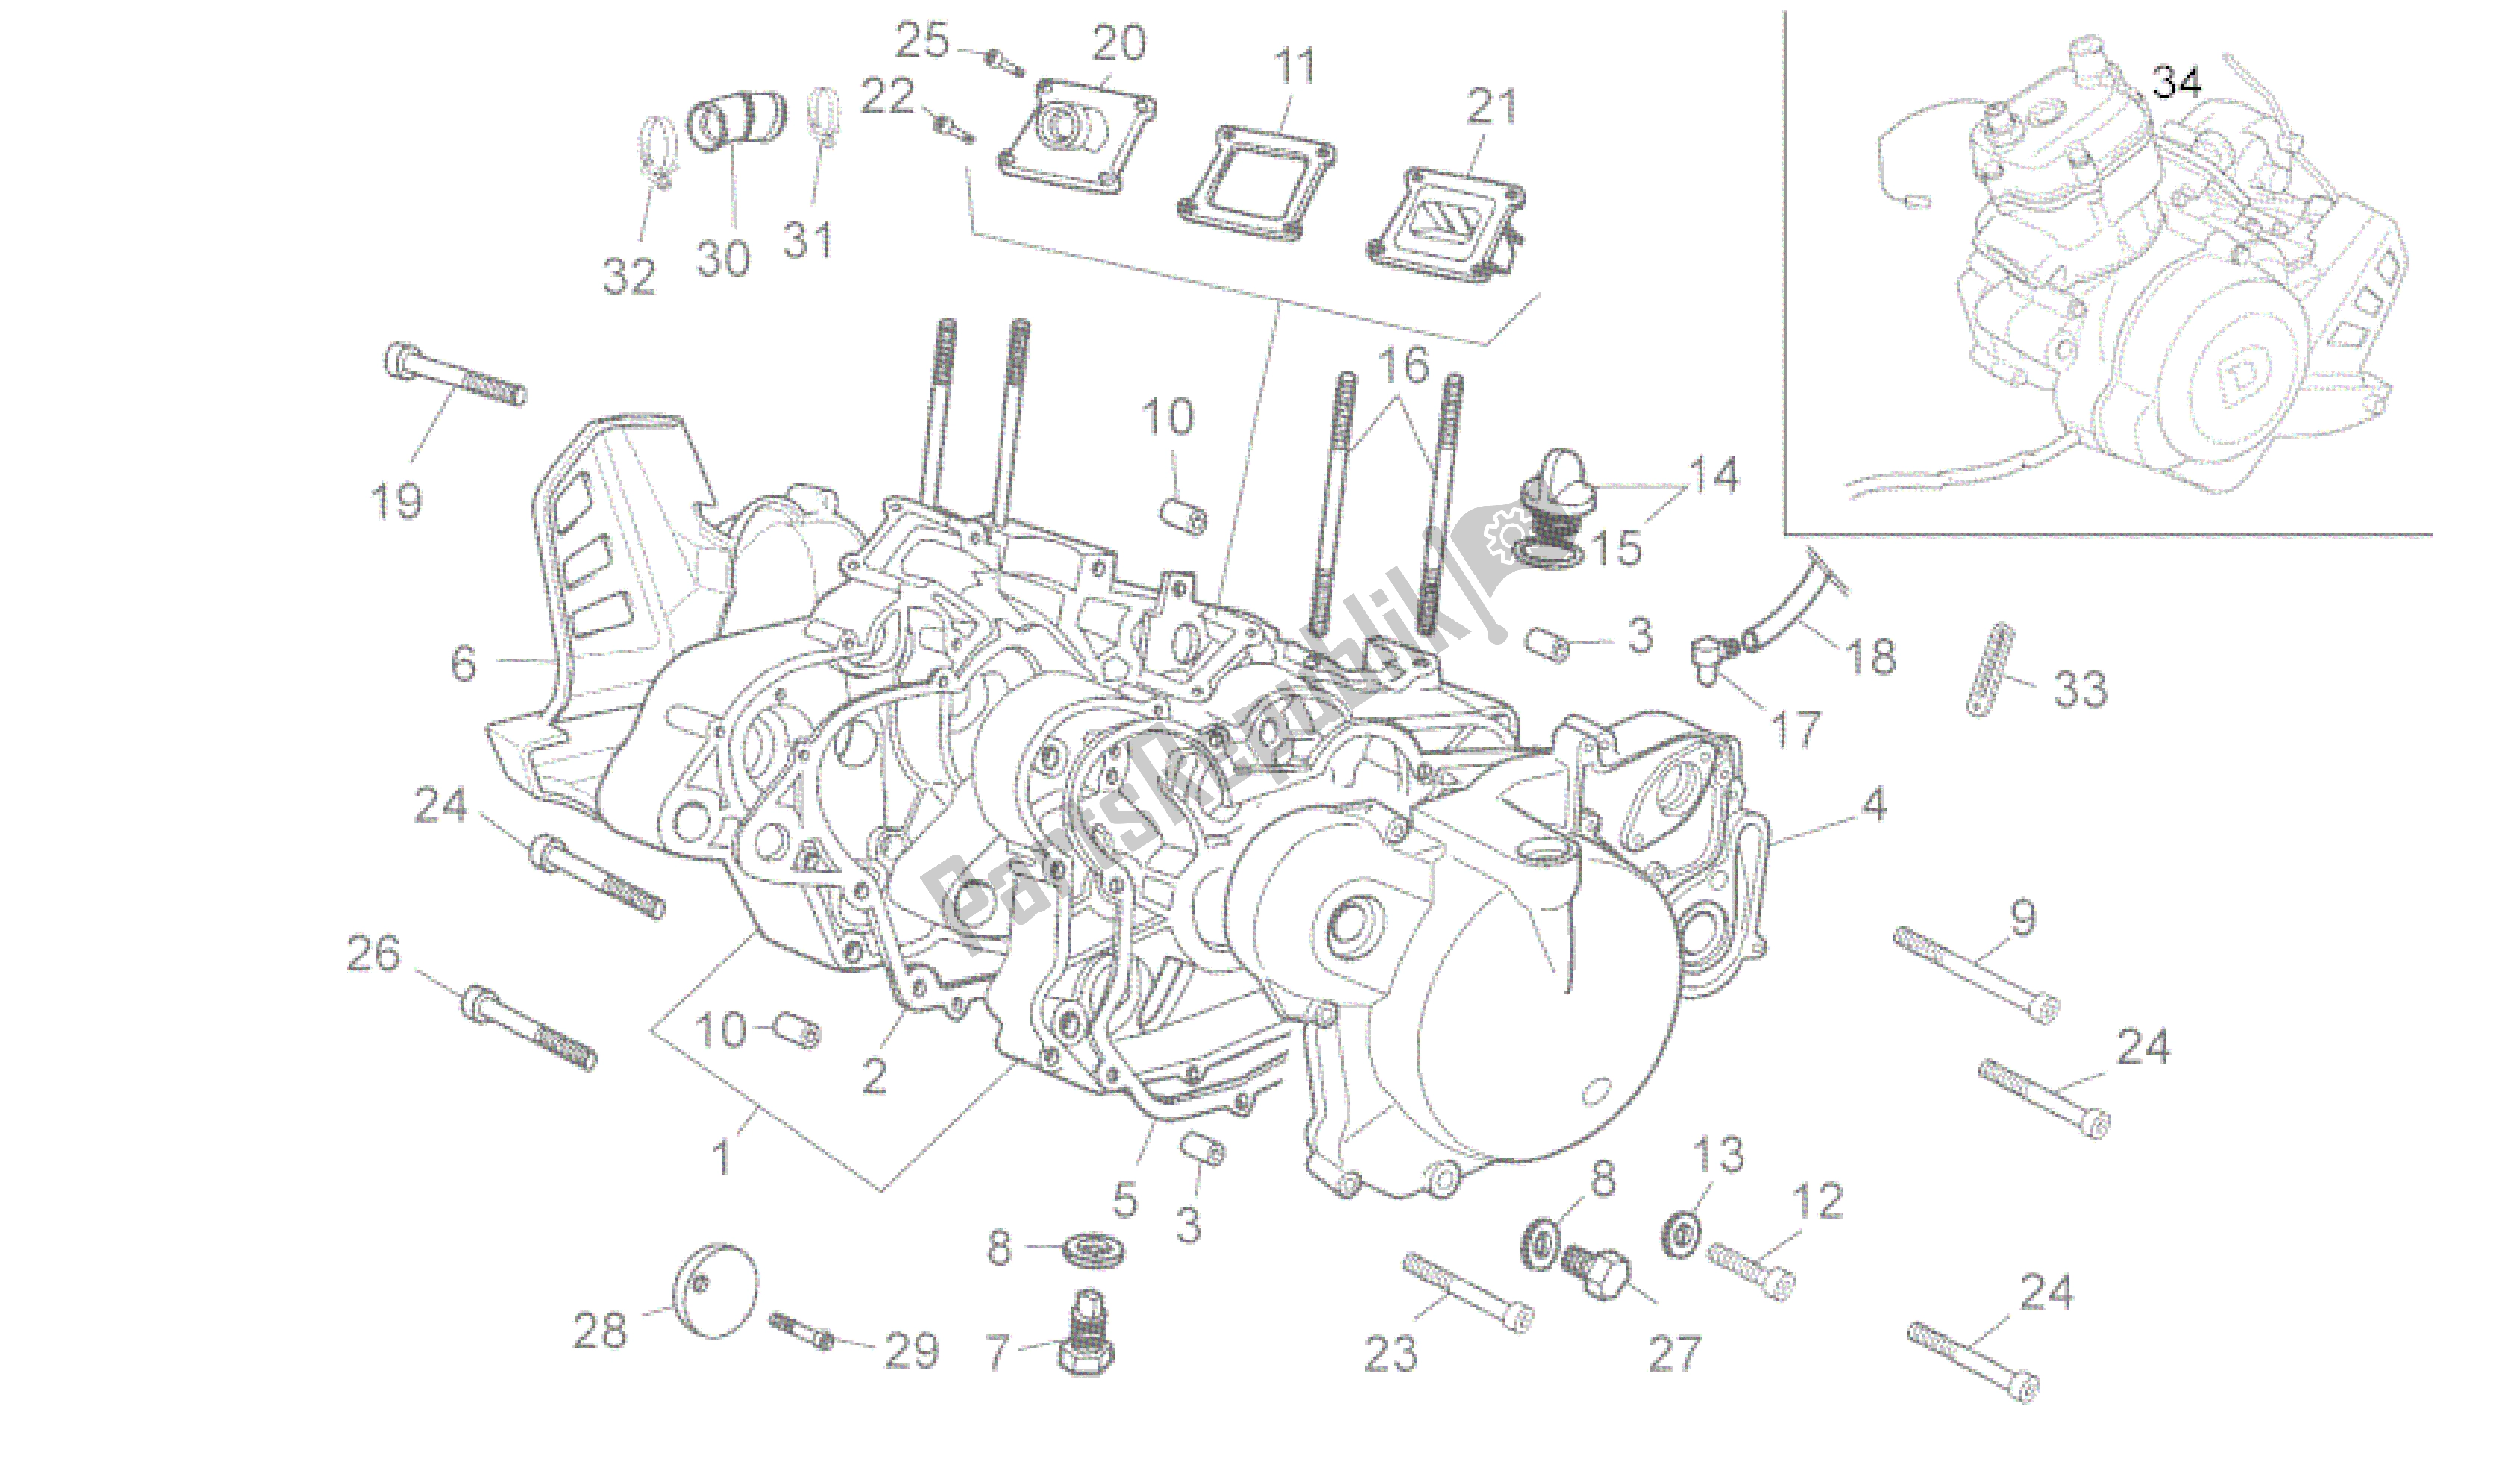 All parts for the Carters of the Aprilia RS 50 2006 - 2010